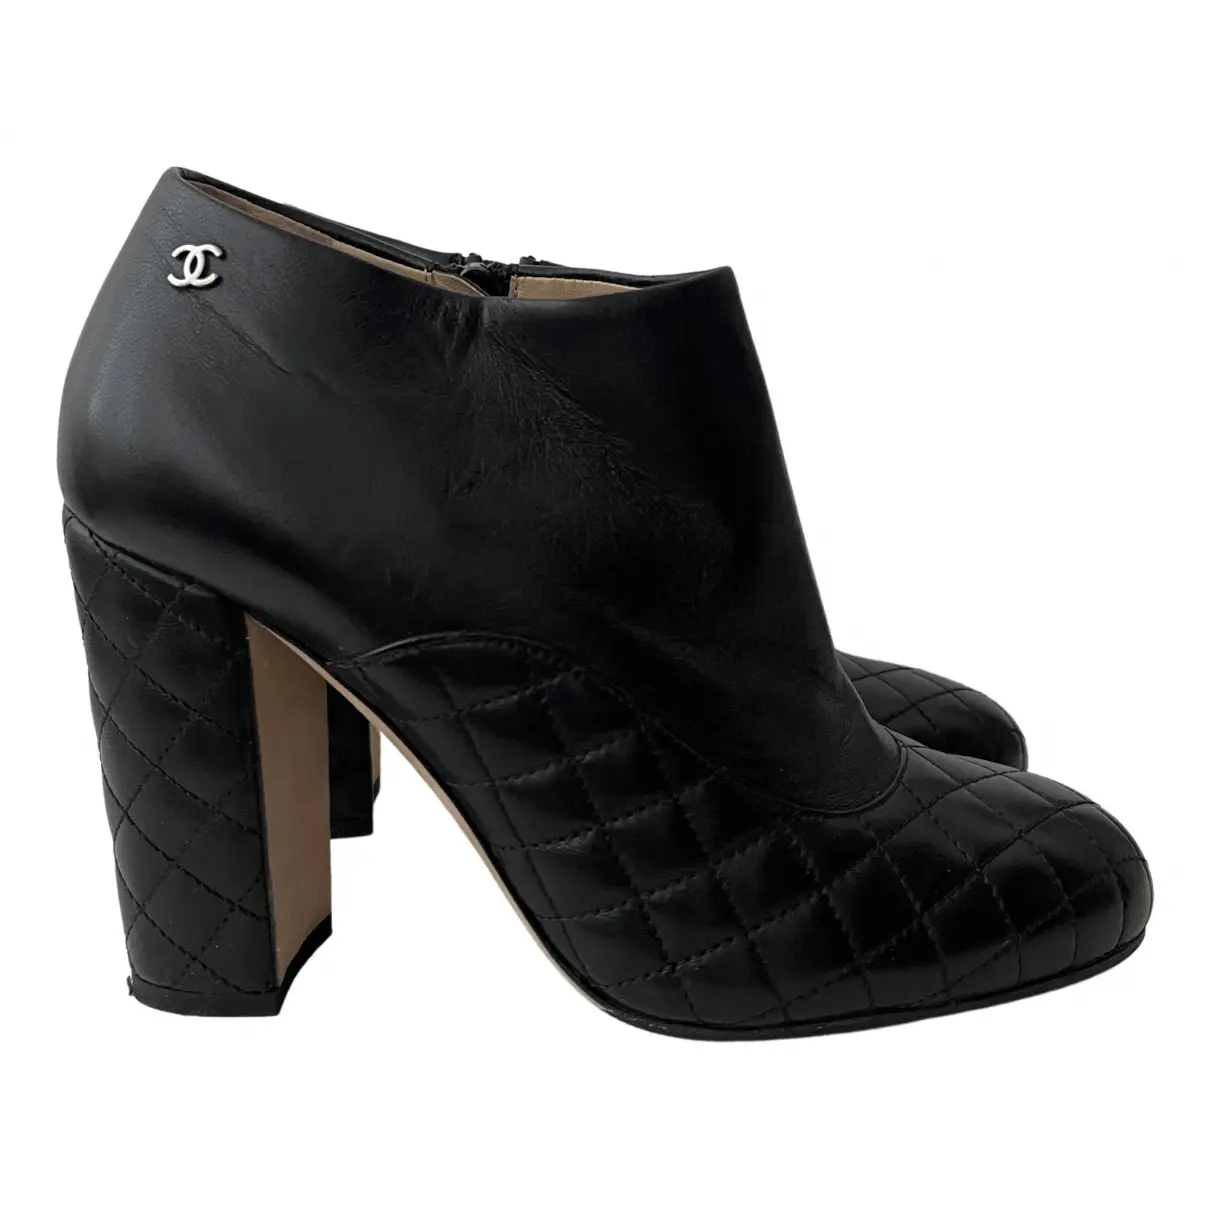 Leather ankle boots Chanel